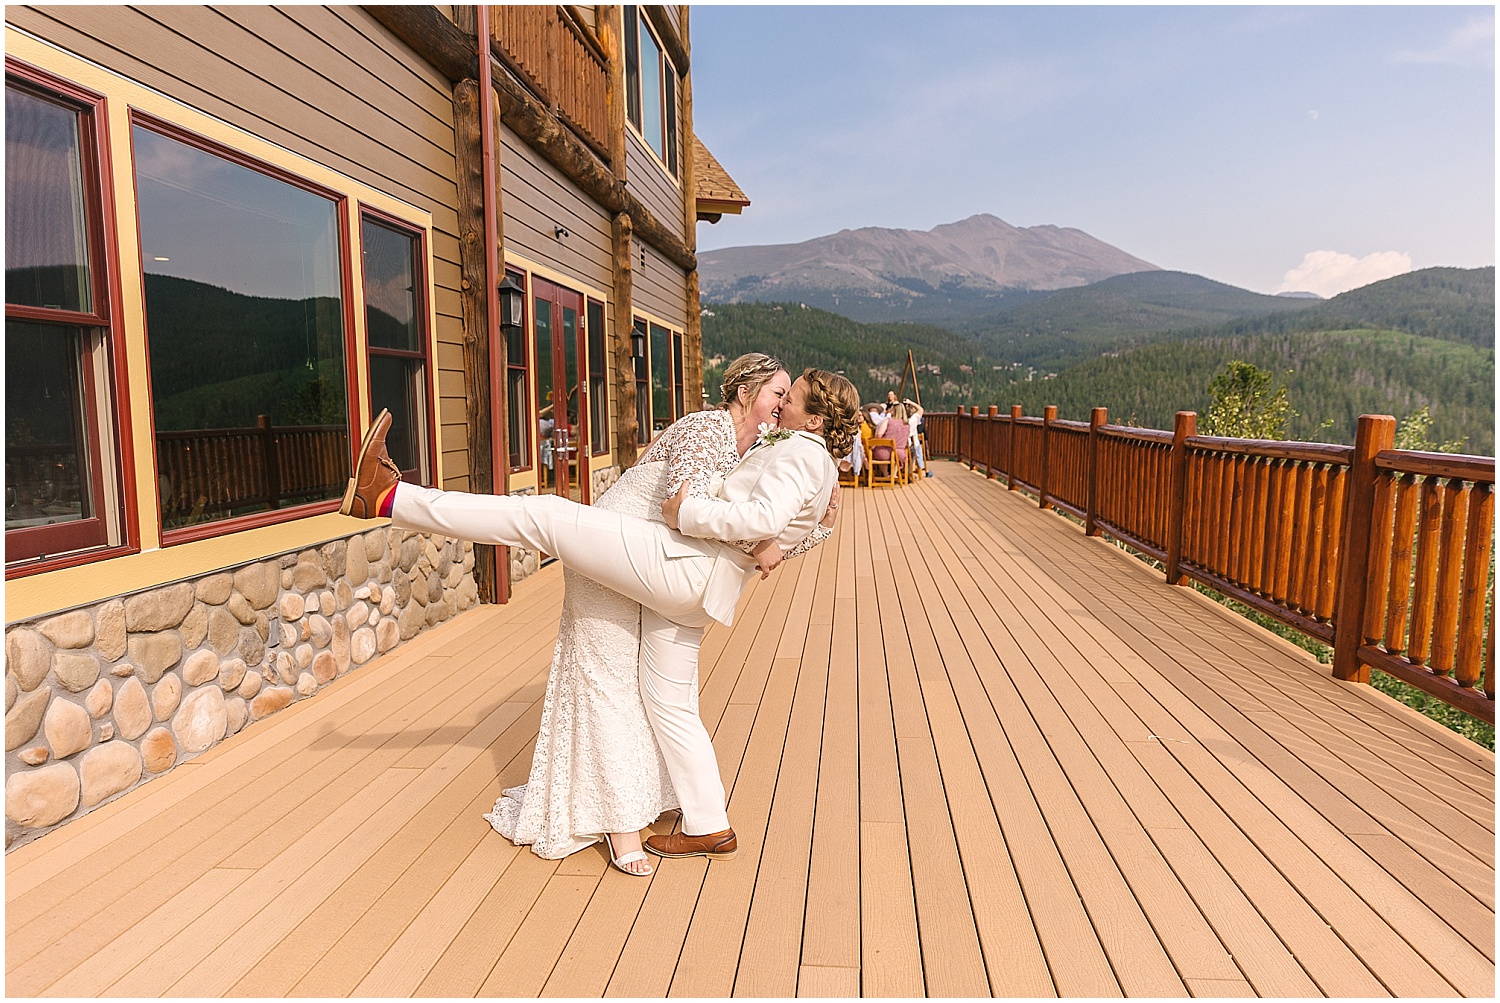 Bride dips her bride for a kiss on the deck at the Lodge at Breckenridge